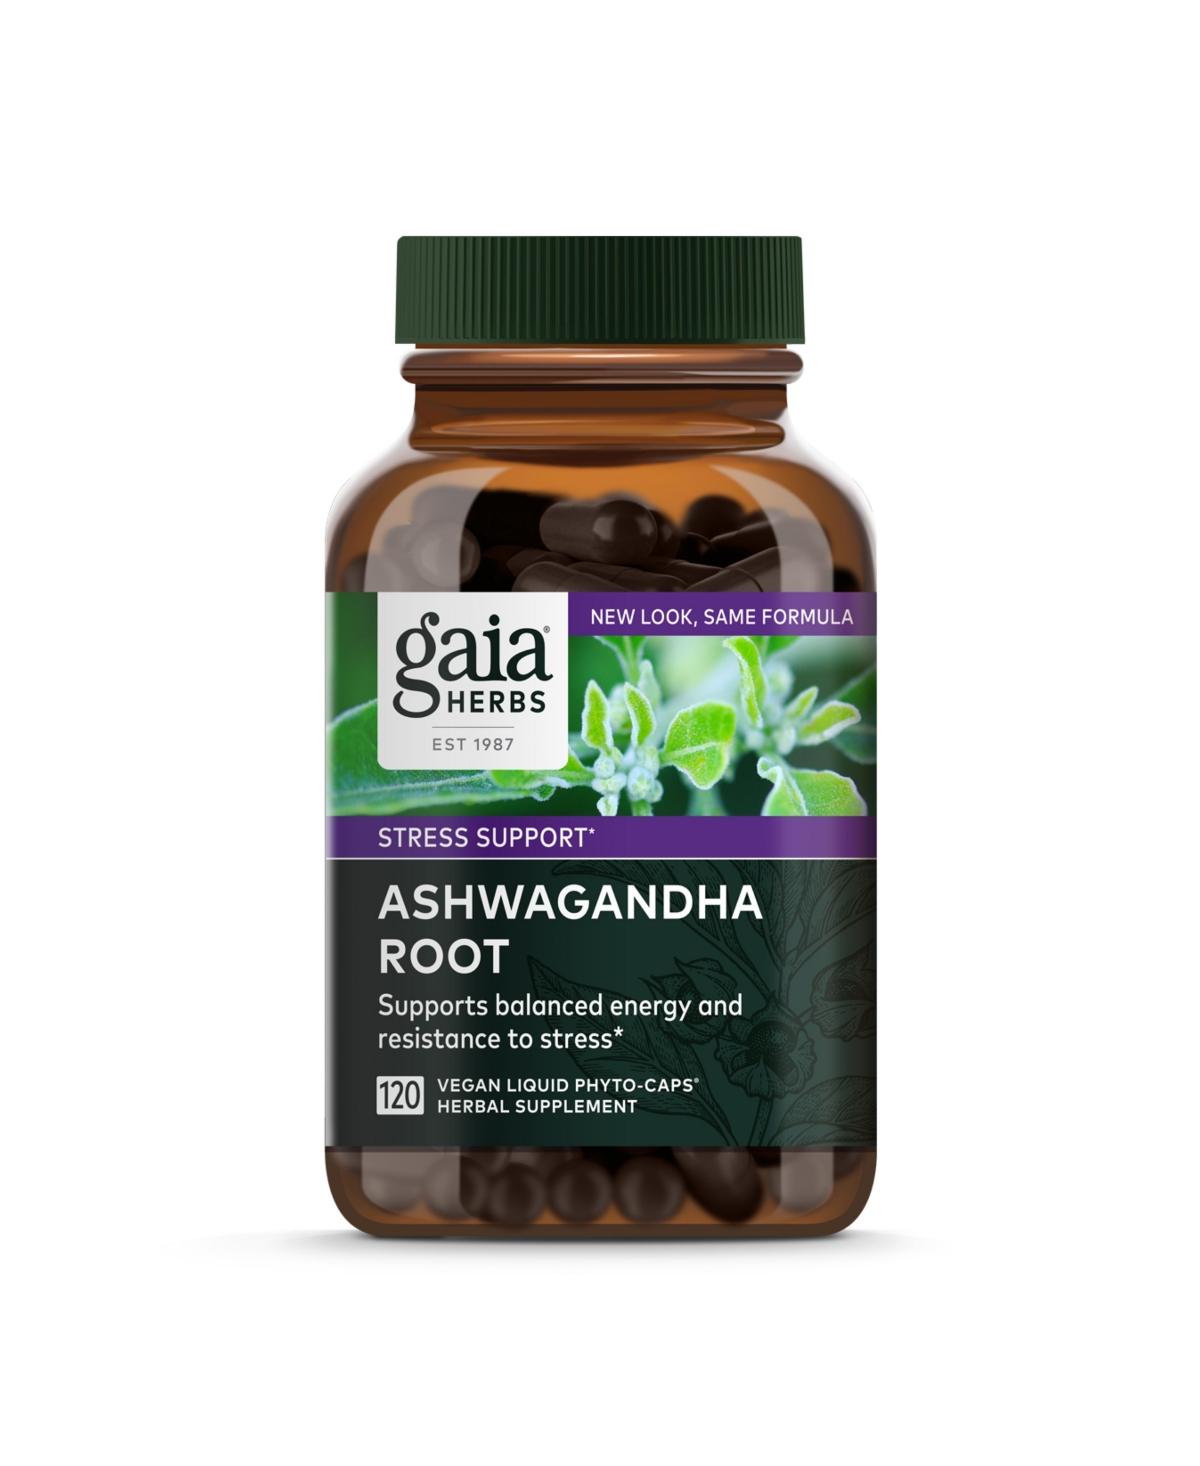 Ashwagandha Root - Made with Organic Ashwagandha Root to Help Support a Healthy Response to Stress, the Immune System, and Restful Sleep -